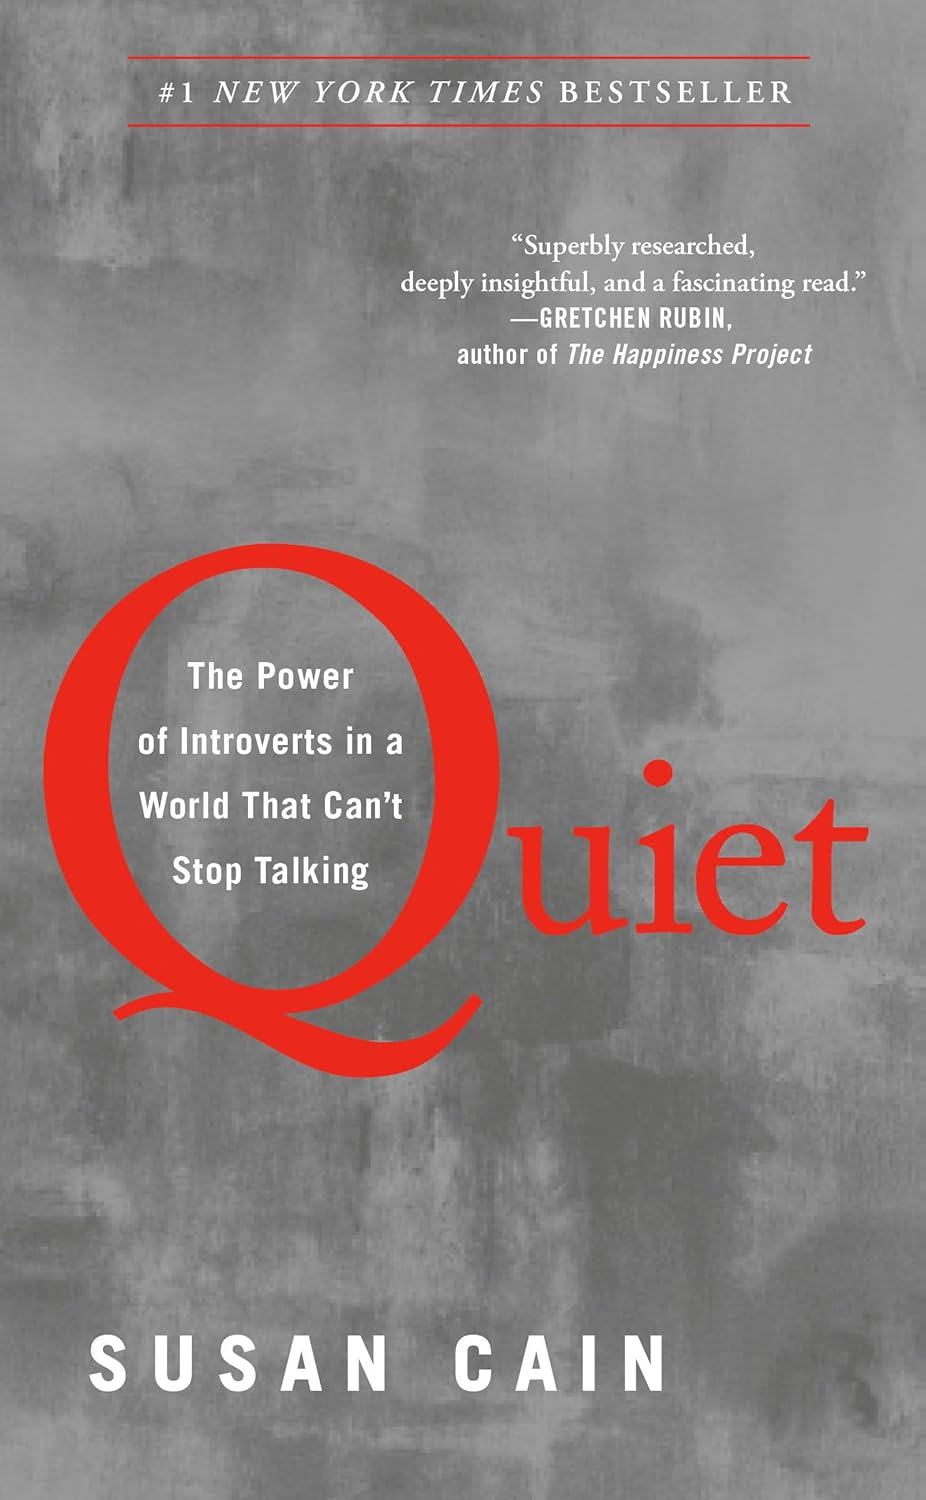 Quiet the power of introverts in a world that cant stop talking